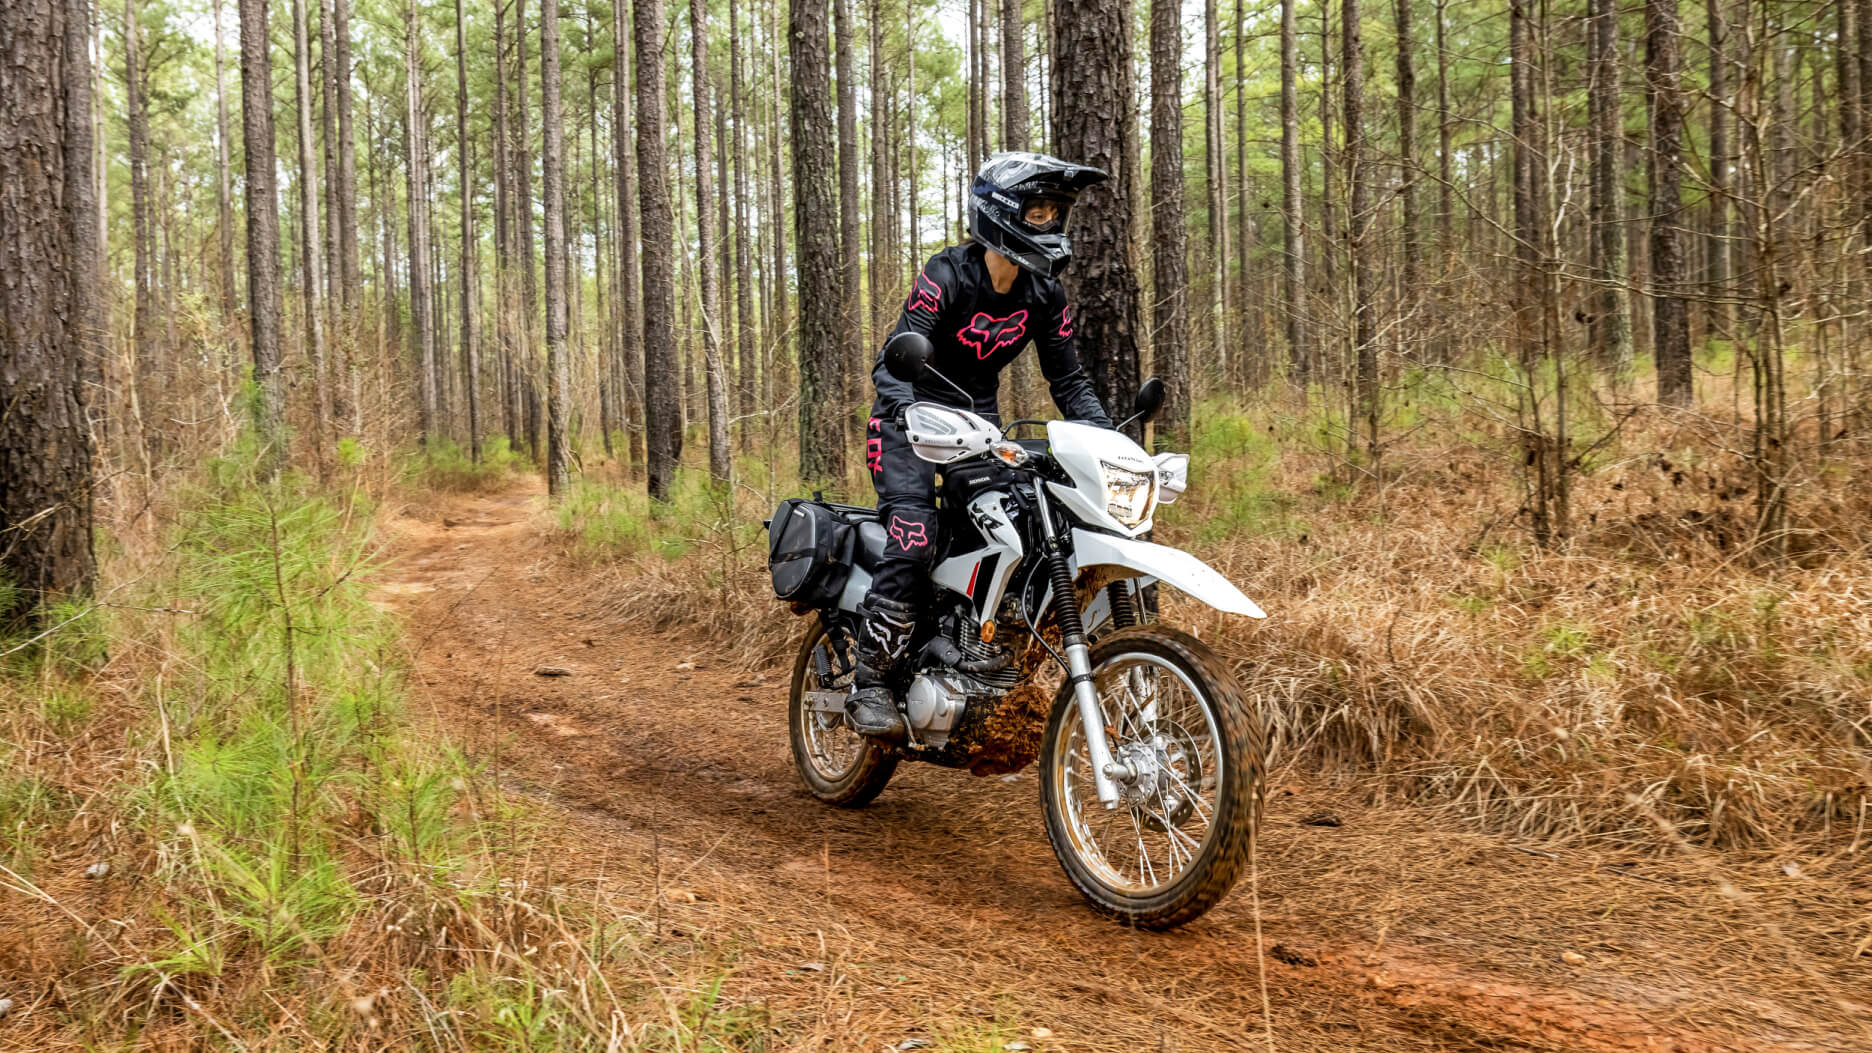 A rider on a Honda XR150L in the forest